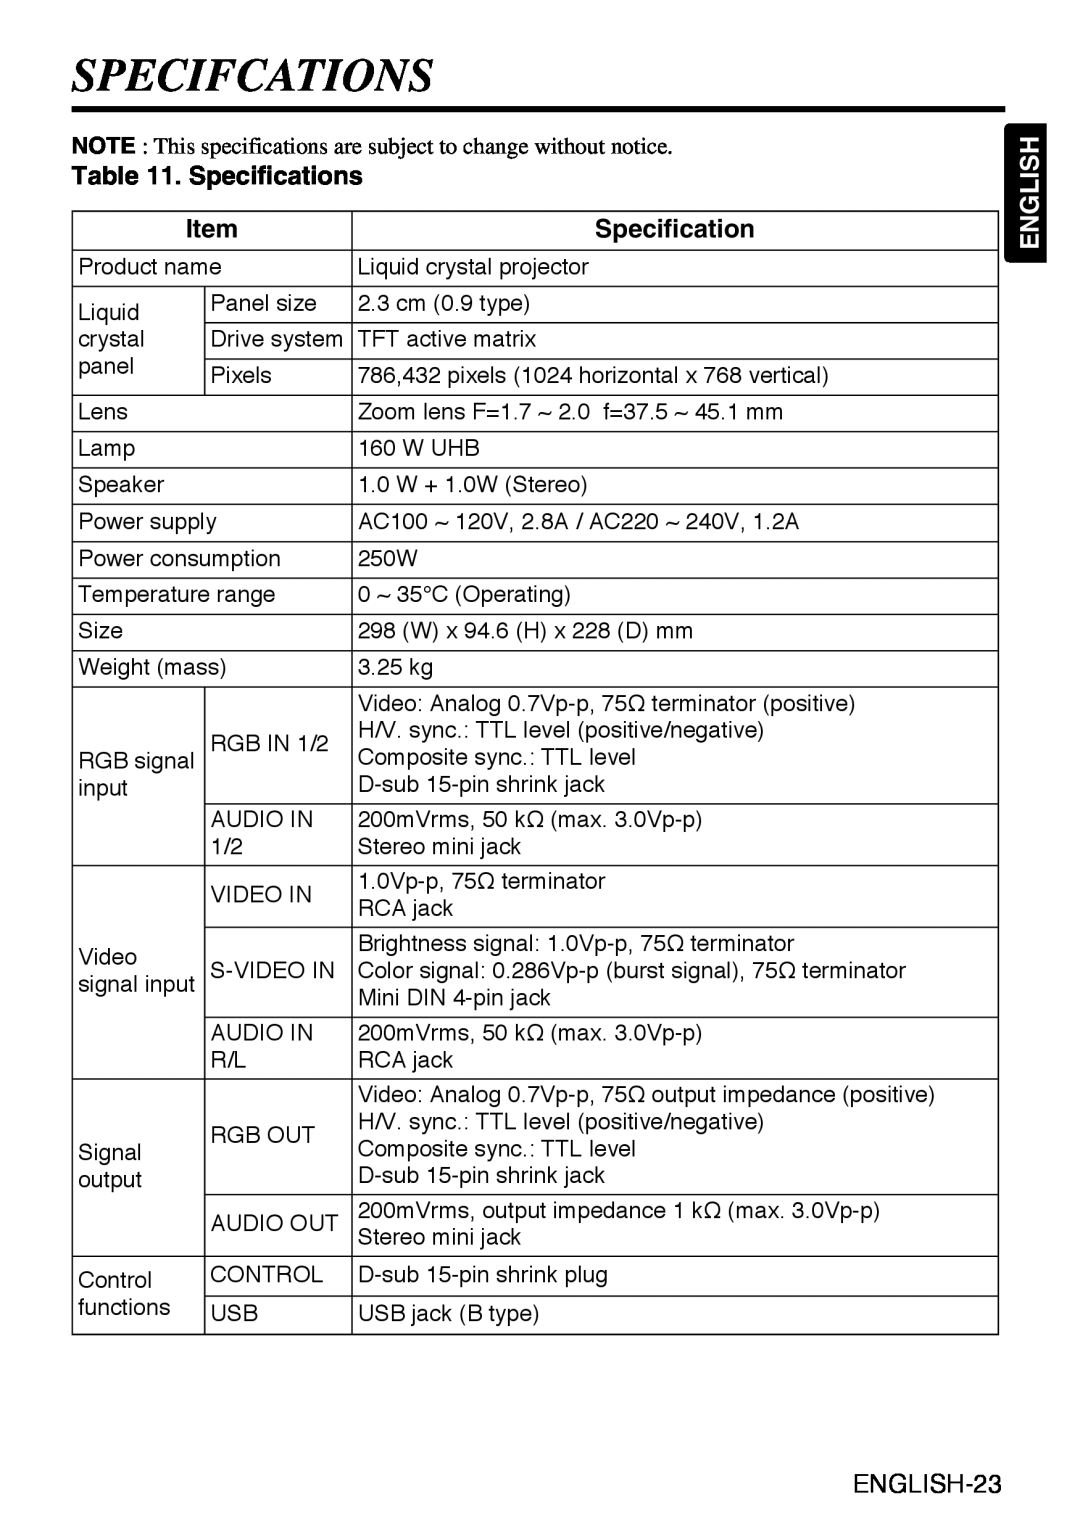 Liesegang dv335 user manual Specifcations, Specifications, ENGLISH-23, English 